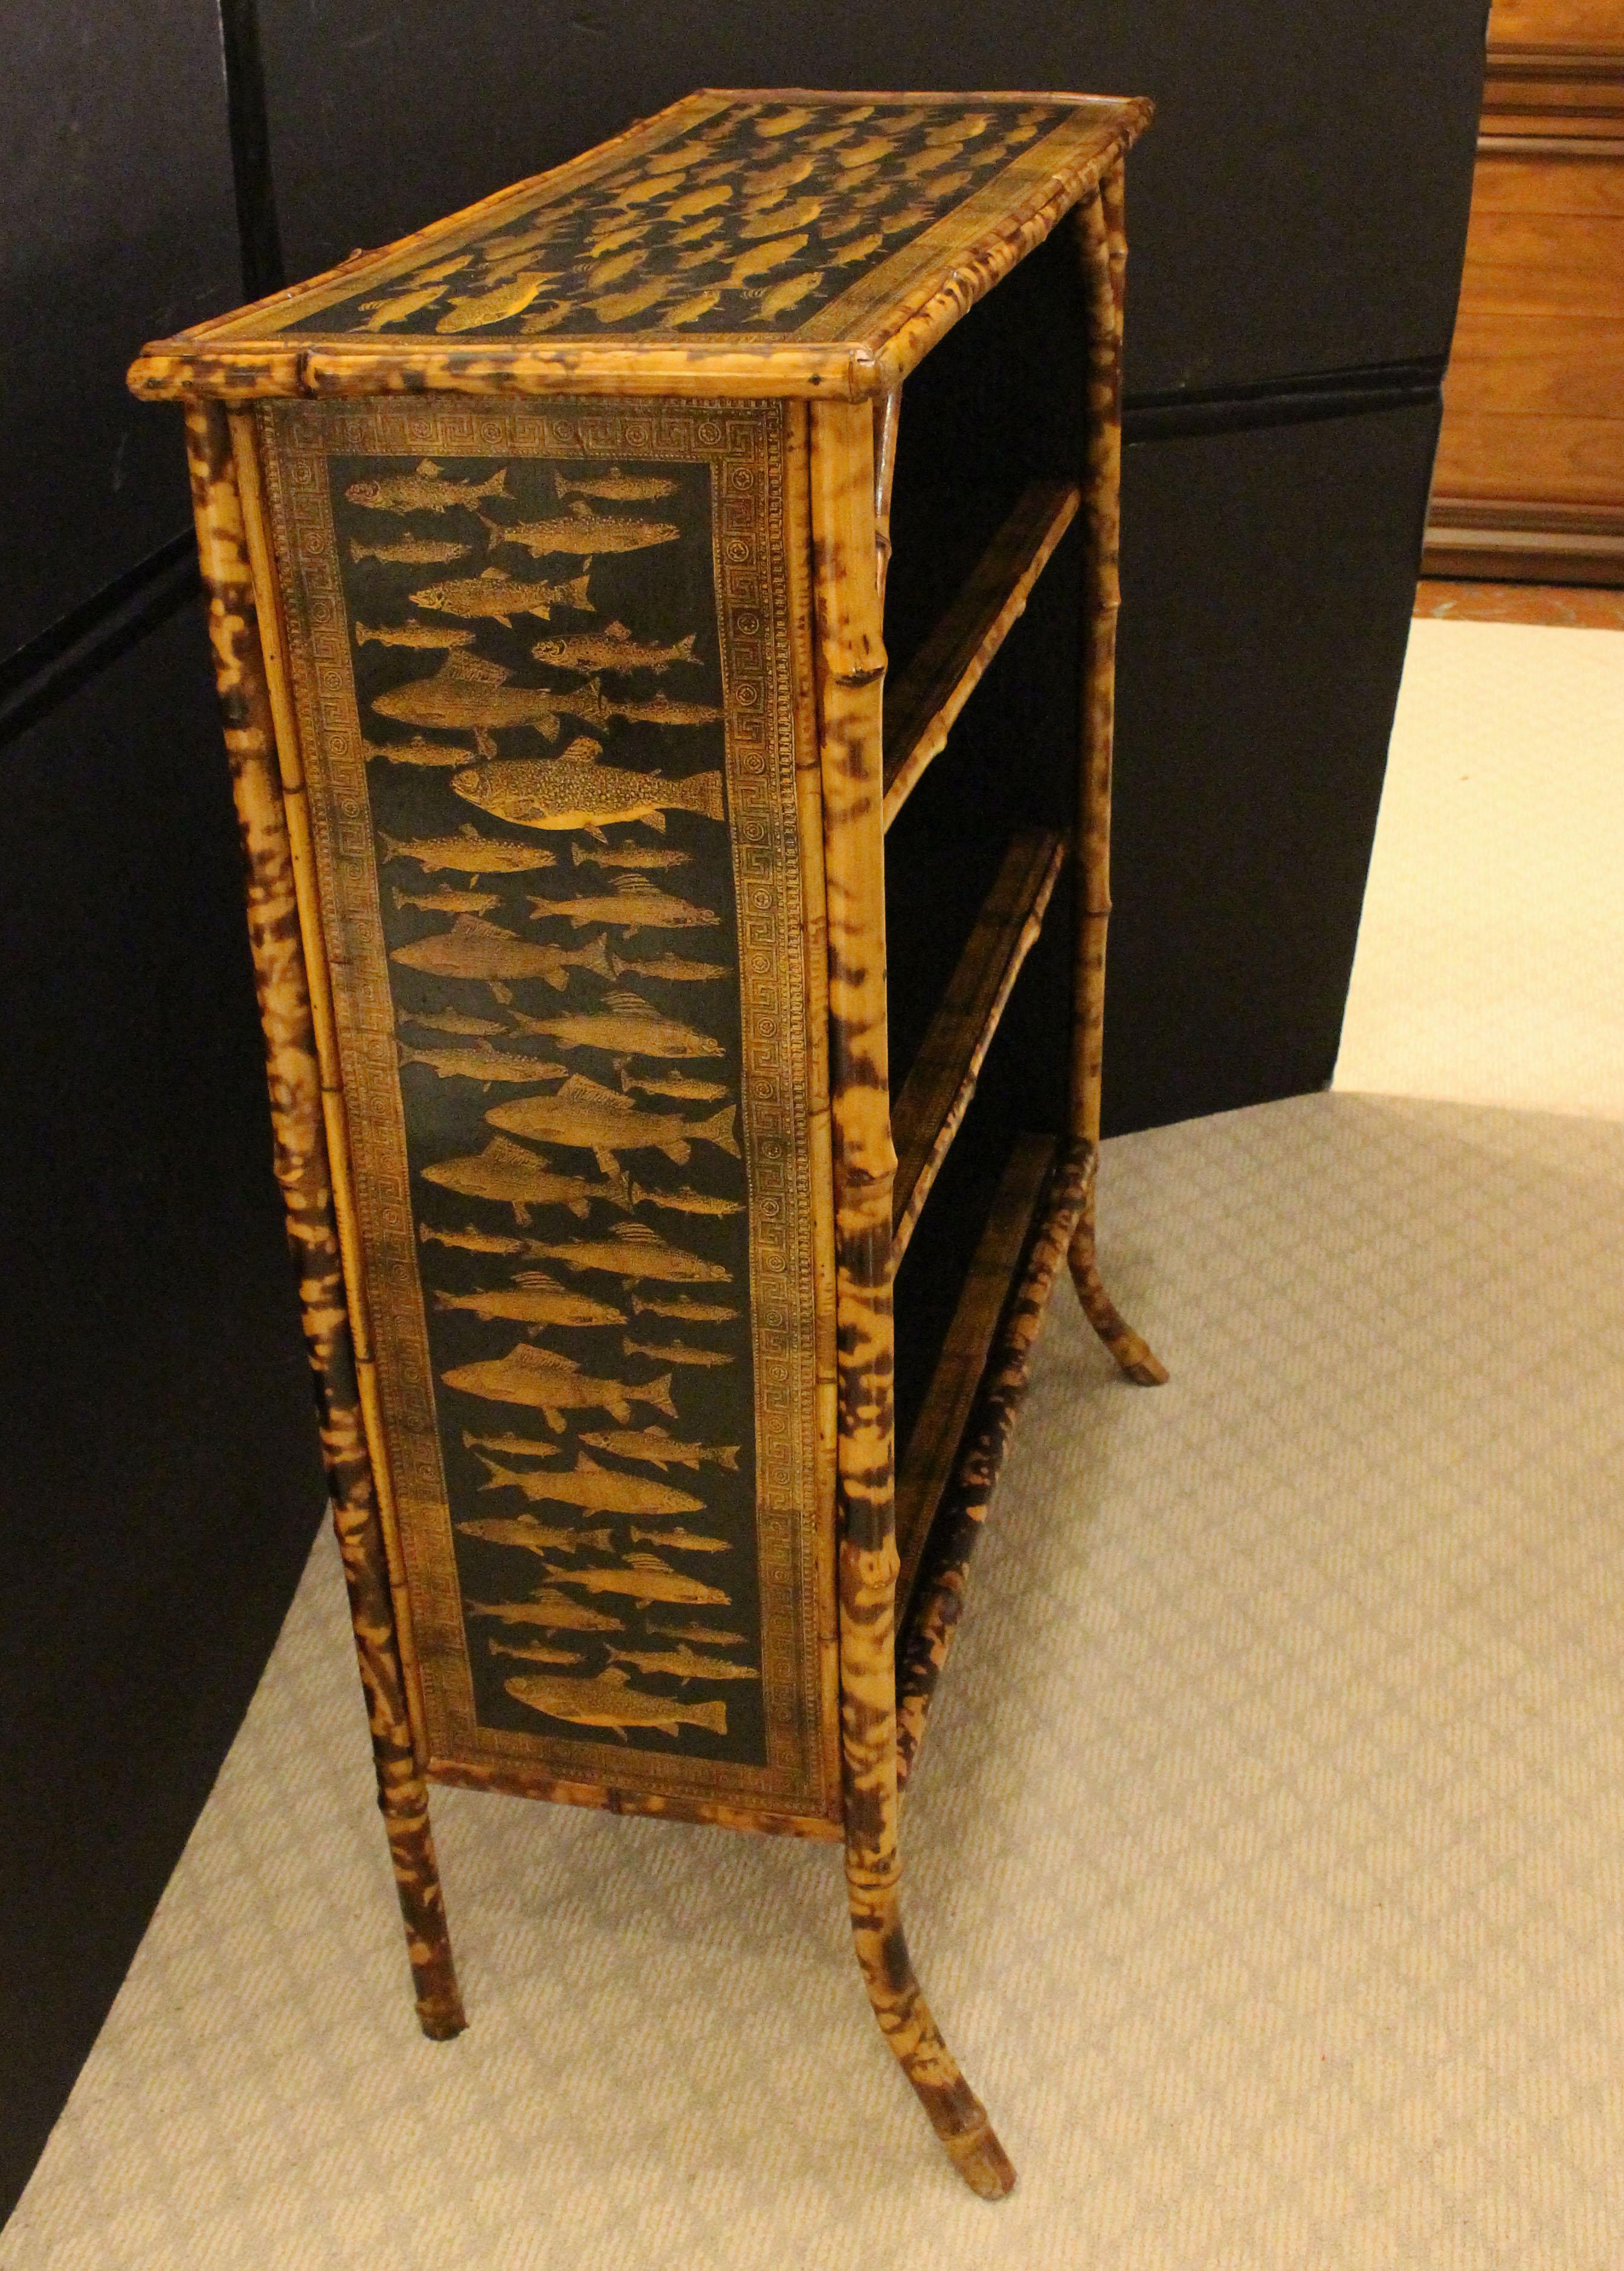 Circa 1880 bamboo bookcase now decoupaged with fish, English. The original rattan surfaces worn out and now replaced with custom hand-decoupage work of fish. Decoupaged Greek key borders on the three shelves. Architectural strut supports for top,